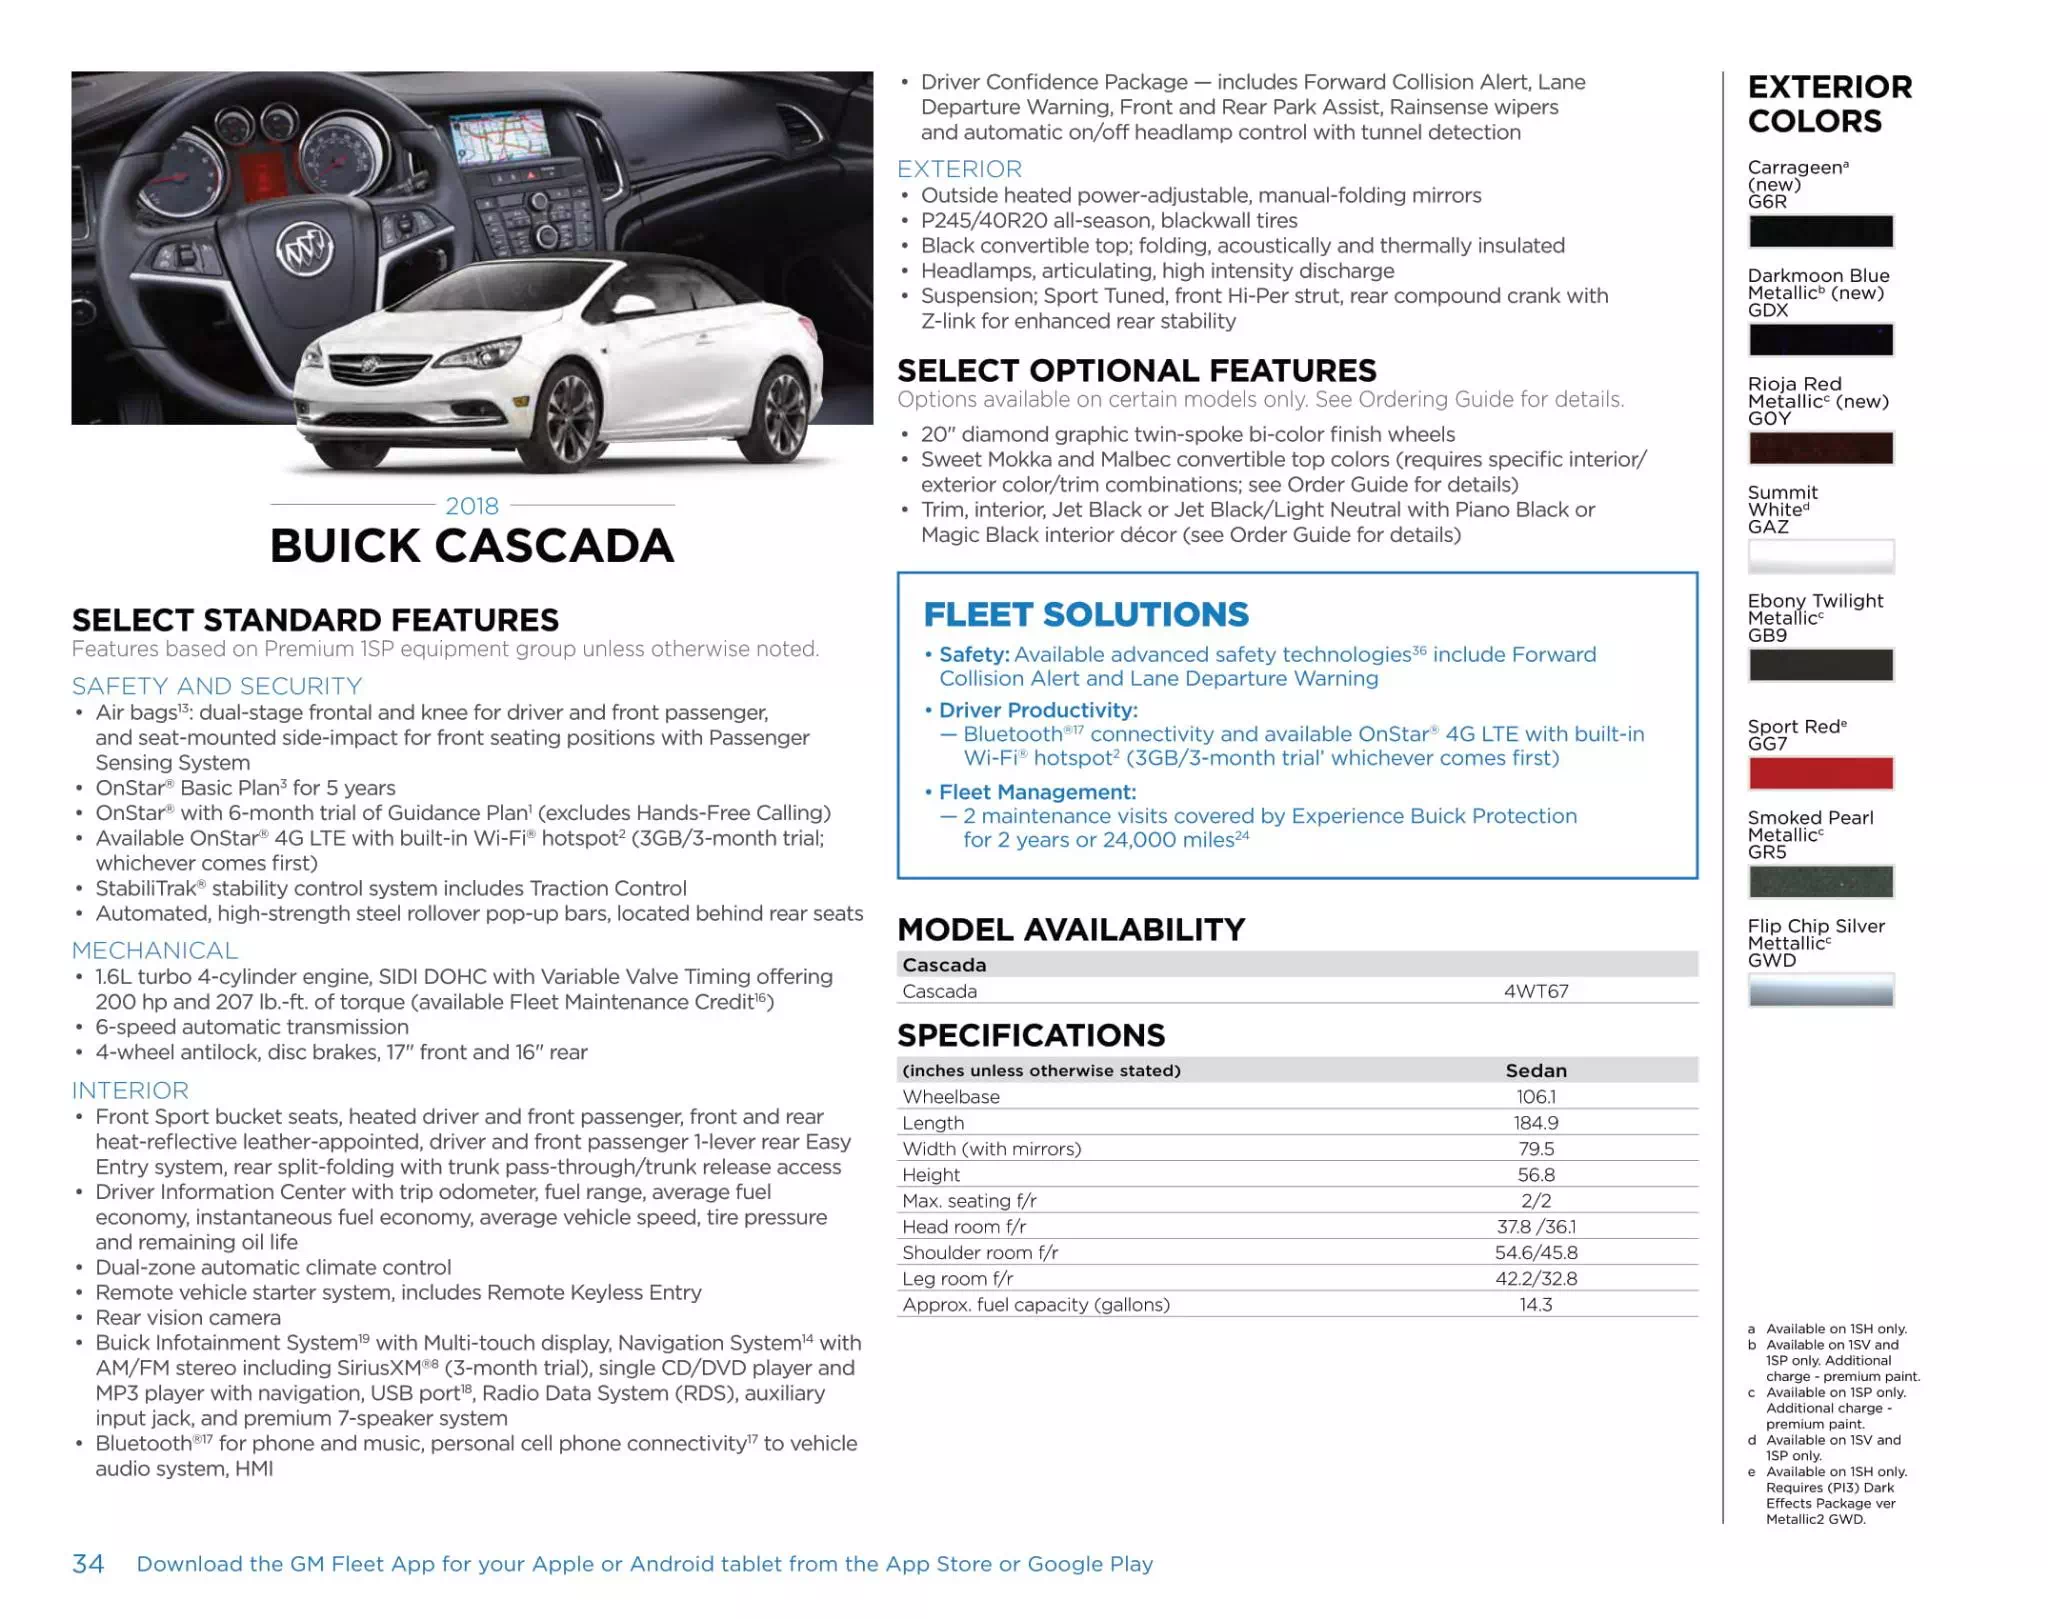 General Motors Sell sheet for Buick Cascada Models, and Color Codes in 2018